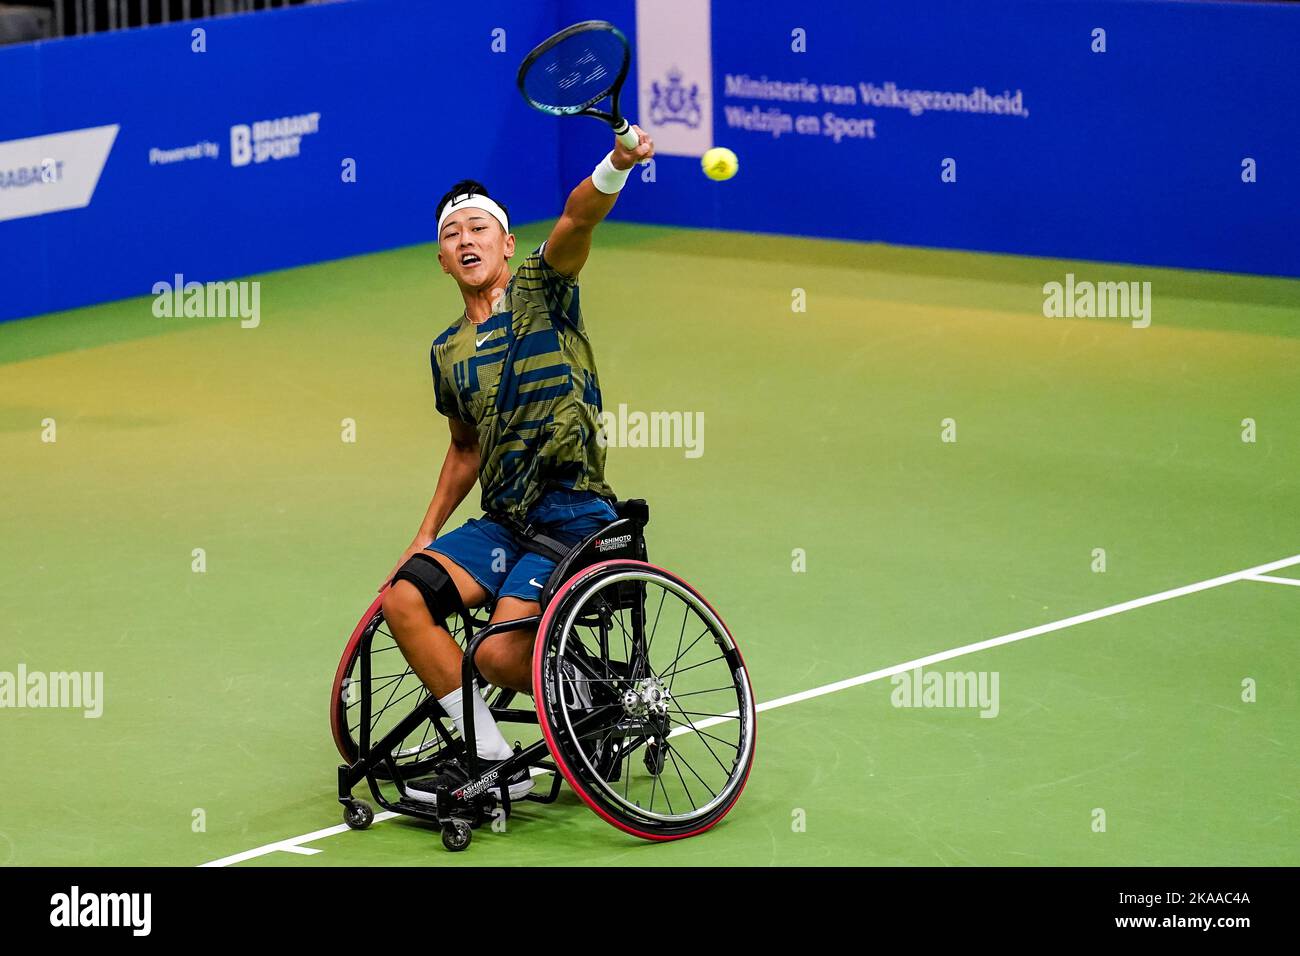 OSS, NETHERLANDS - NOVEMBER 1: Tokito Oda of Japan plays a backhand in his match against Alfie Hewett of Great Britain during Day 3 of the 2022 ITF Wheelchair Tennis Masters at Sportcentrum de Rusheuvel on November 1, 2022 in Oss, Netherlands (Photo by Rene Nijhuis/Orange Pictures) Stock Photo